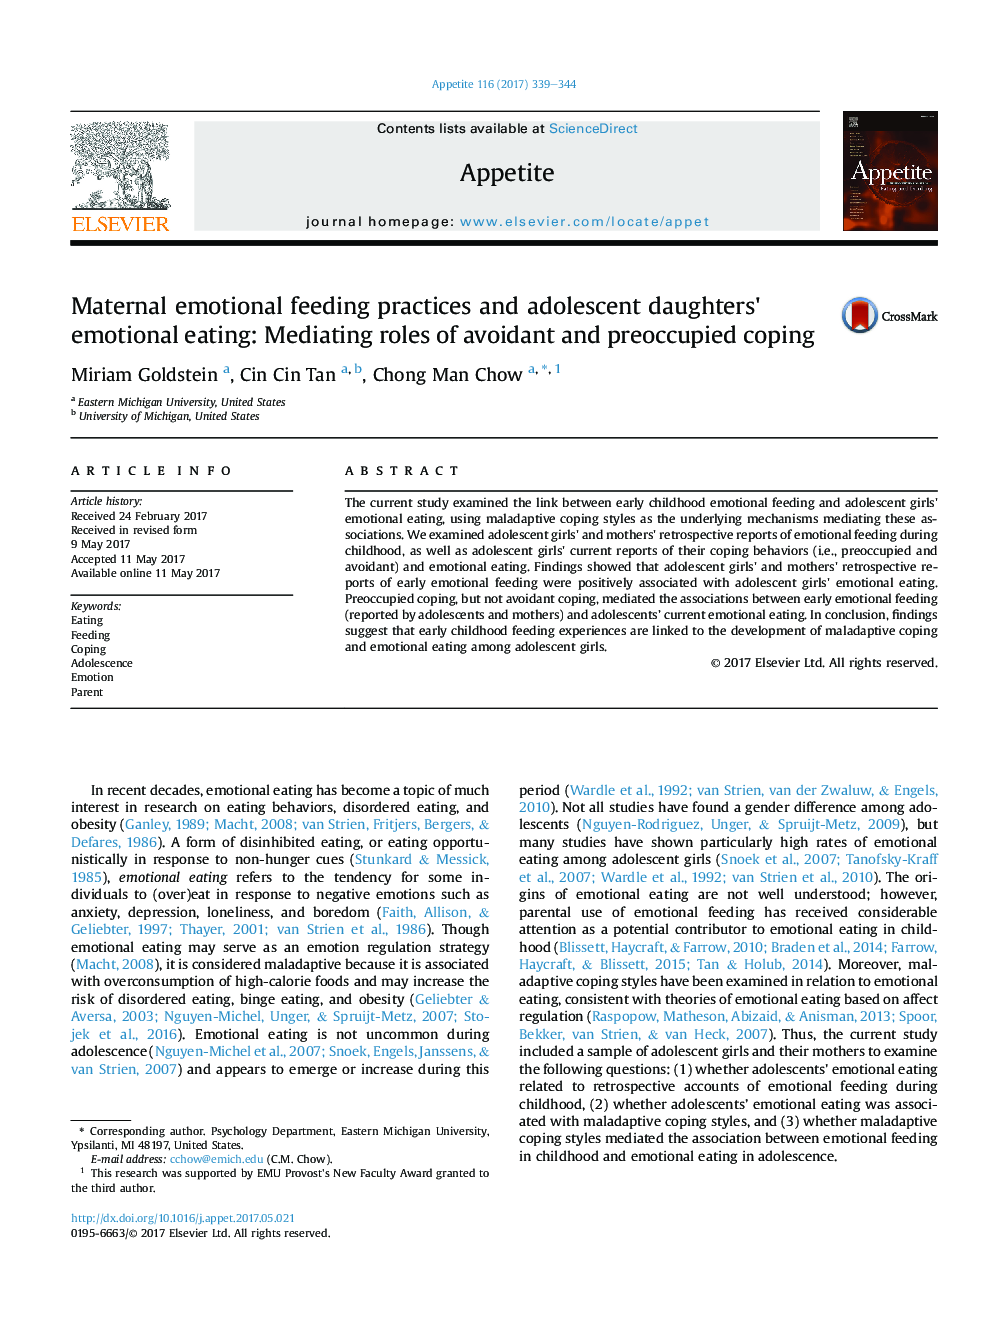 Maternal emotional feeding practices and adolescent daughters' emotional eating: Mediating roles of avoidant and preoccupied coping